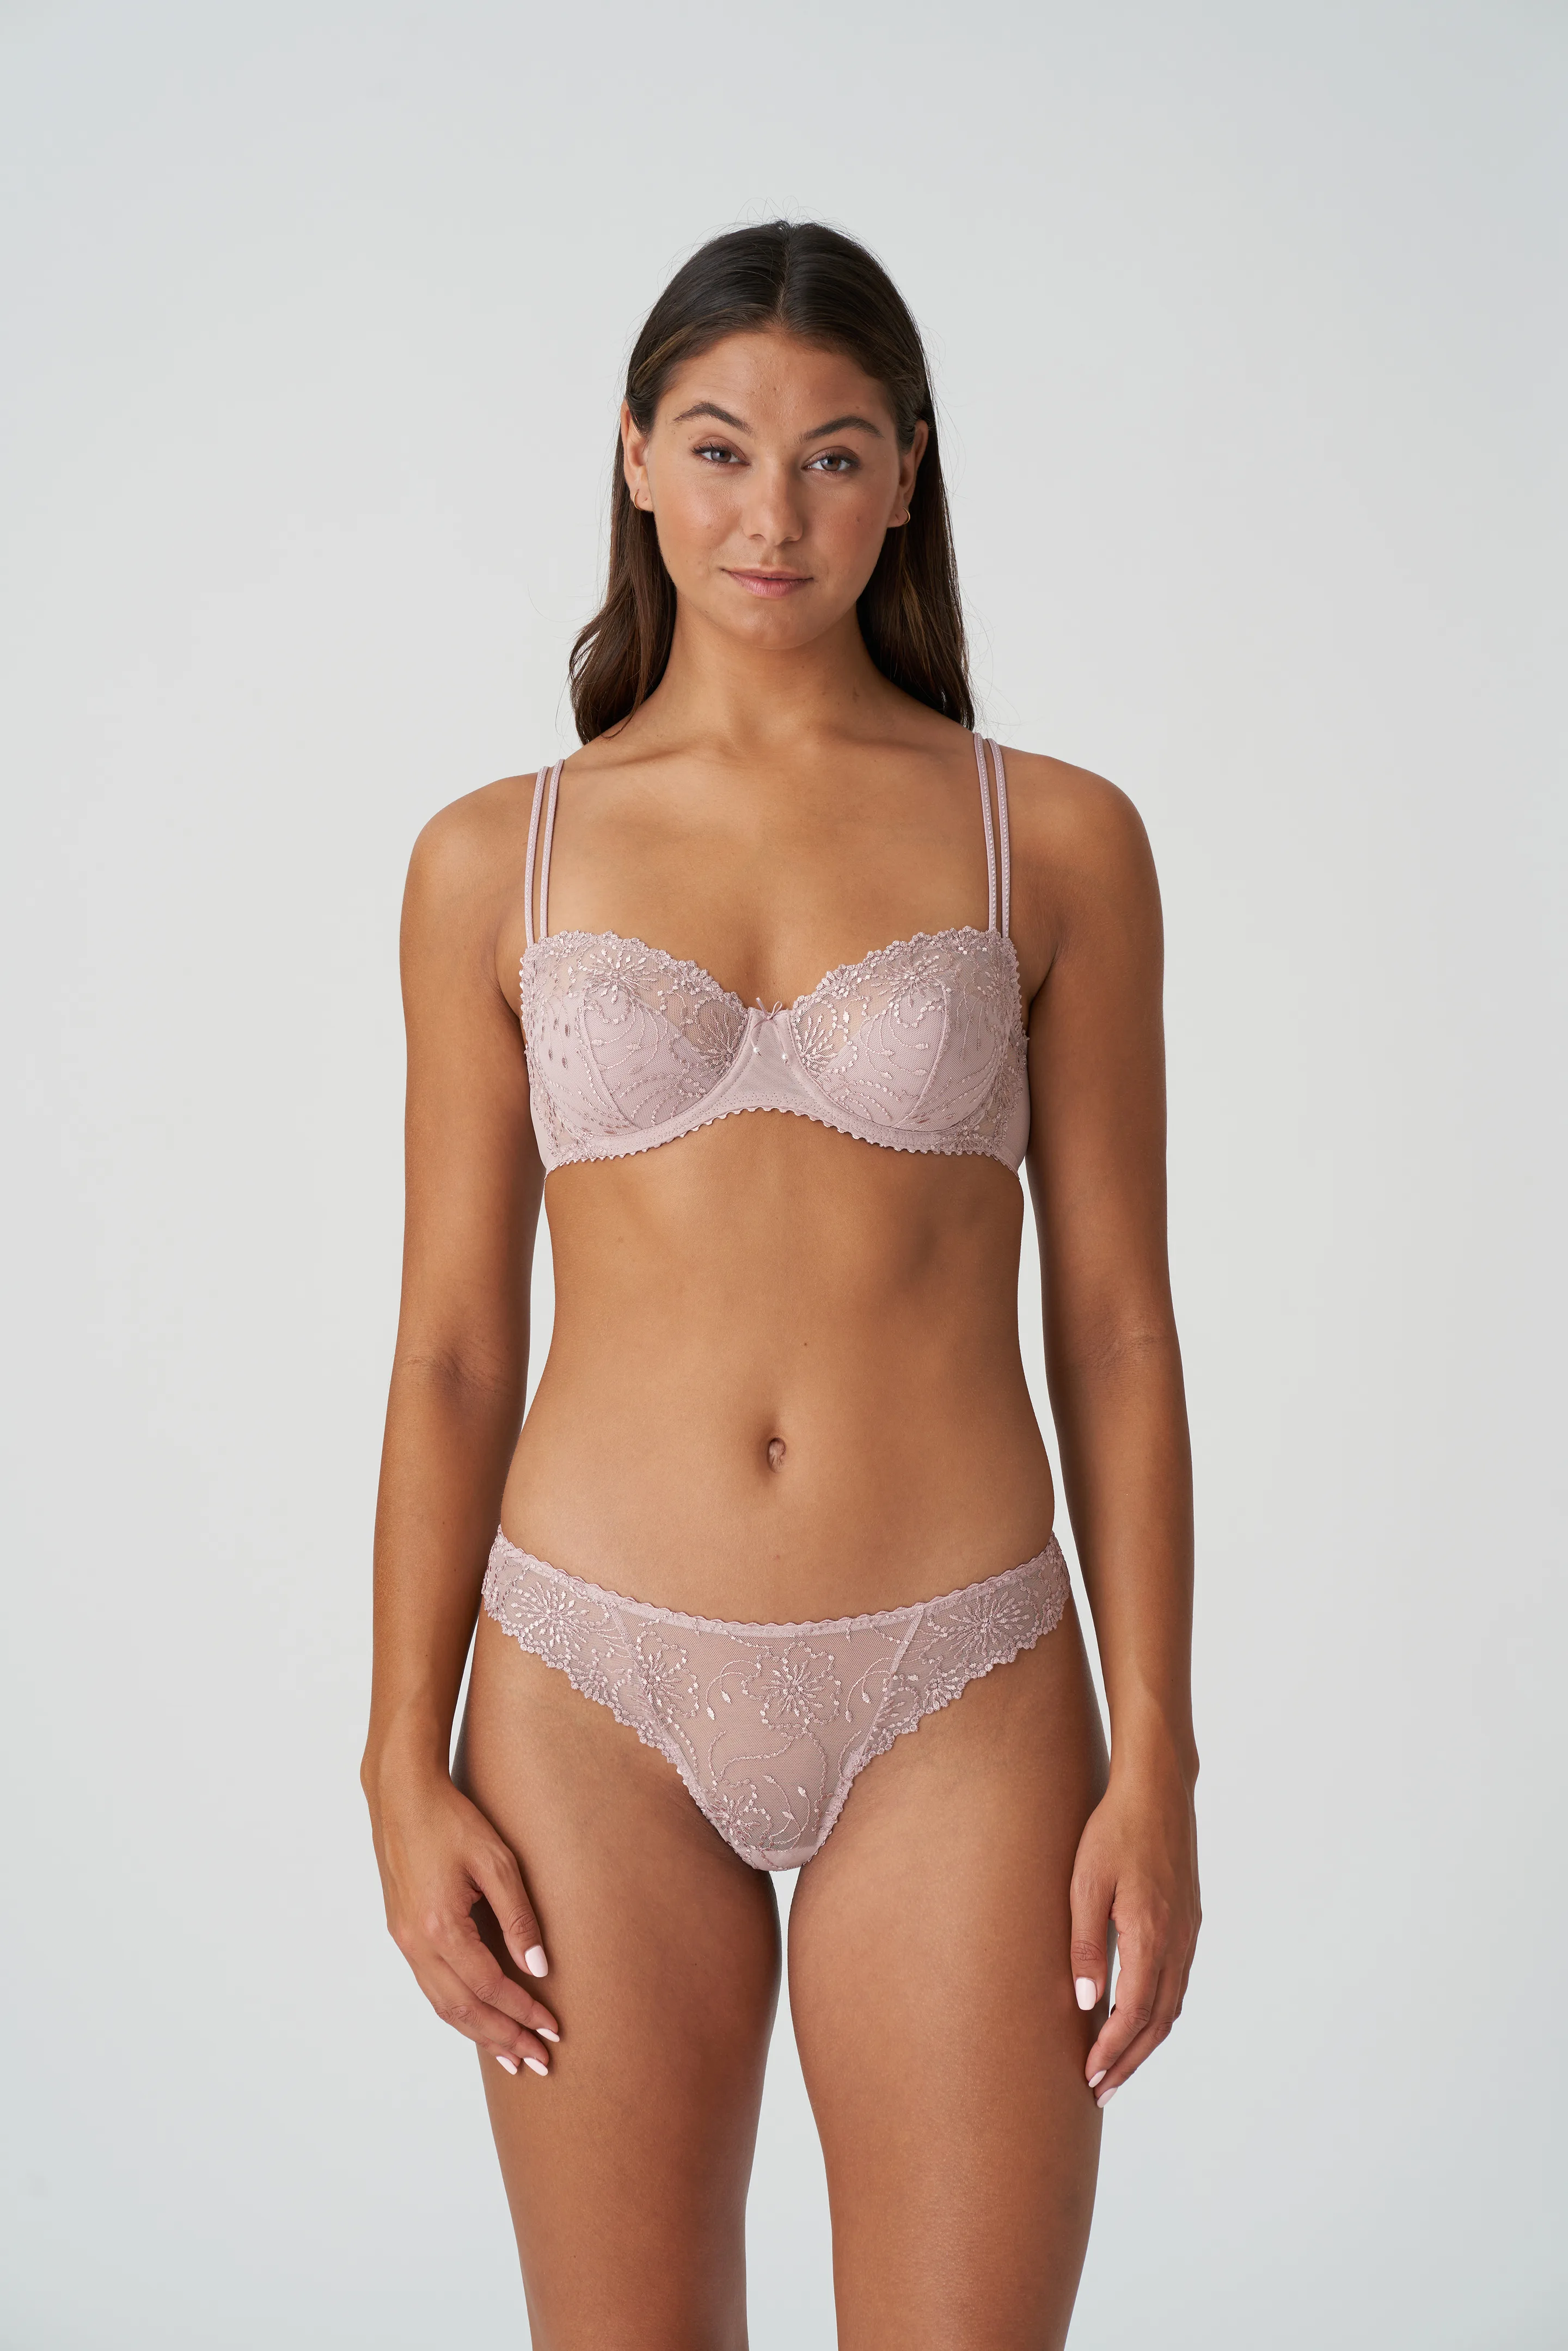 Marie Jo Elis Padded Balcony Bra - Valentine's Day Gifts - Barbours